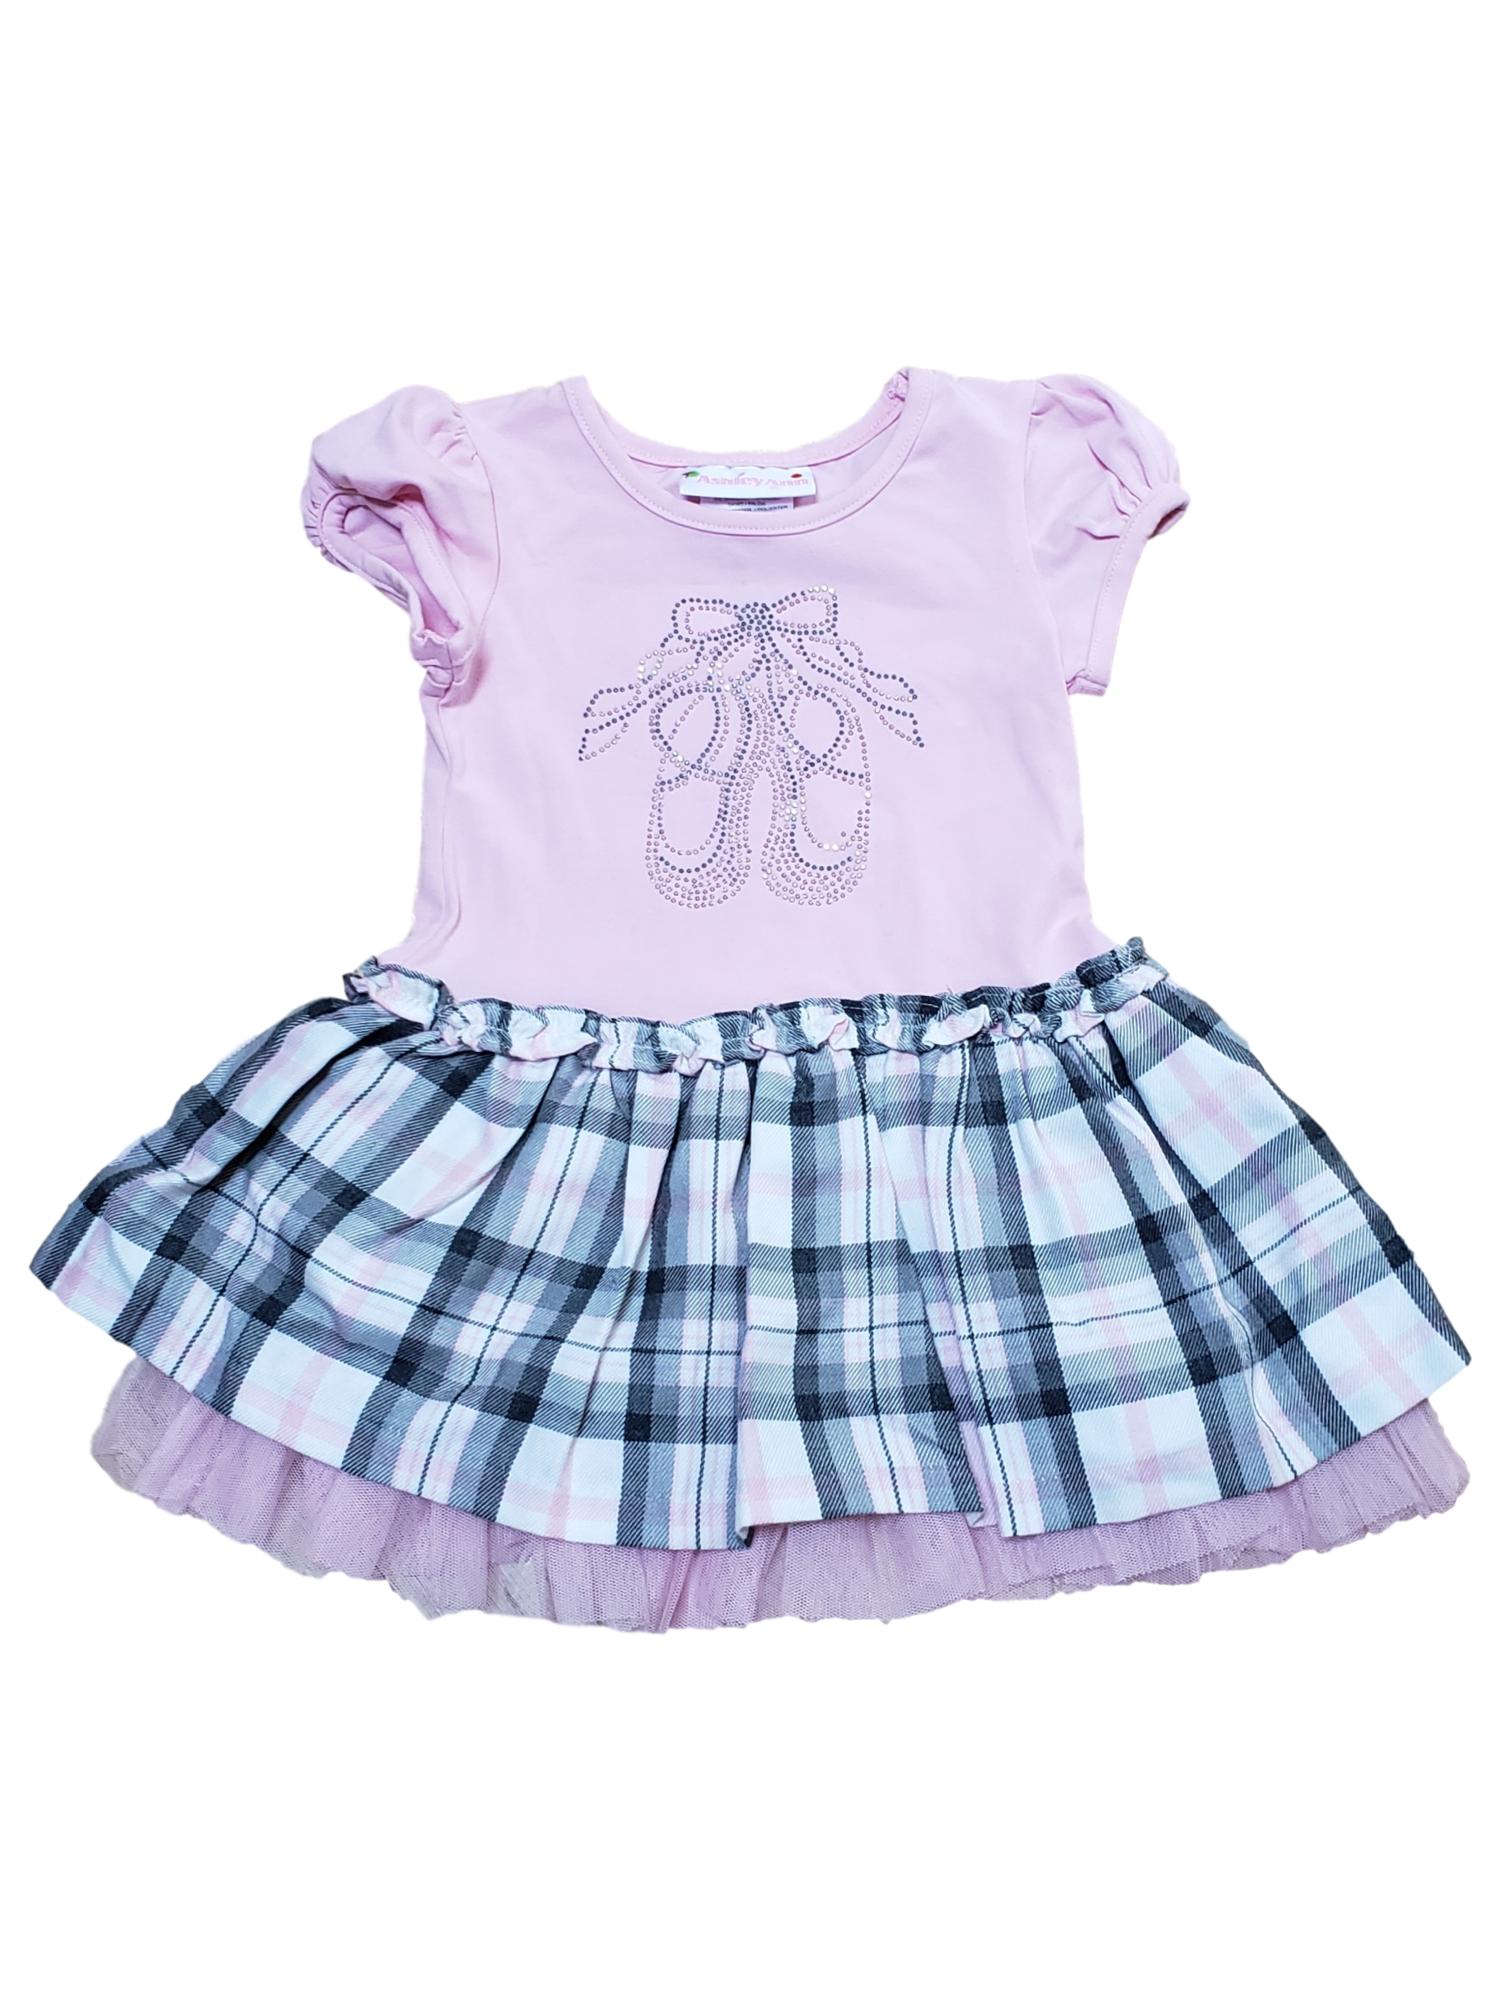 Ashley Ann Infant Baby Girls Pink Sparkly Ballet Slippers Plaid Layered Tulle Dress 18M